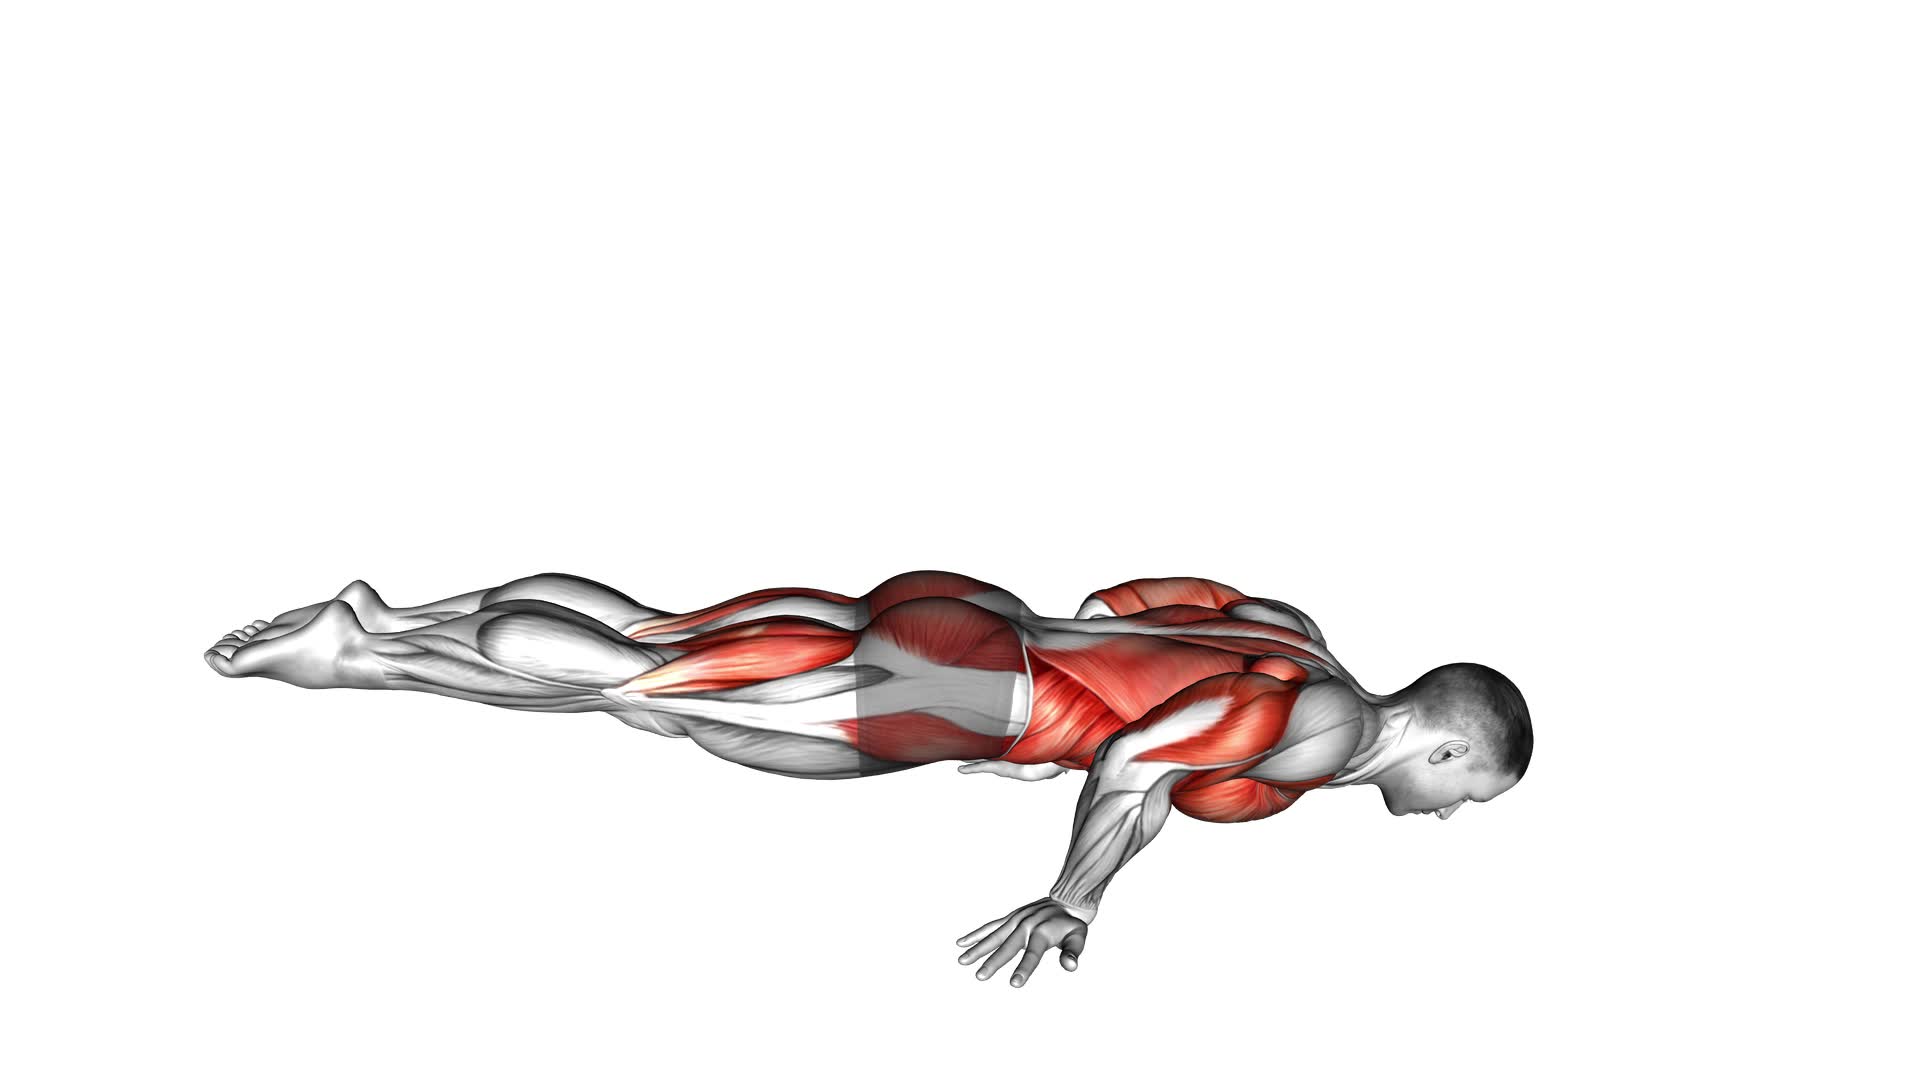 Full Planche Push-up - Video Exercise Guide & Tips